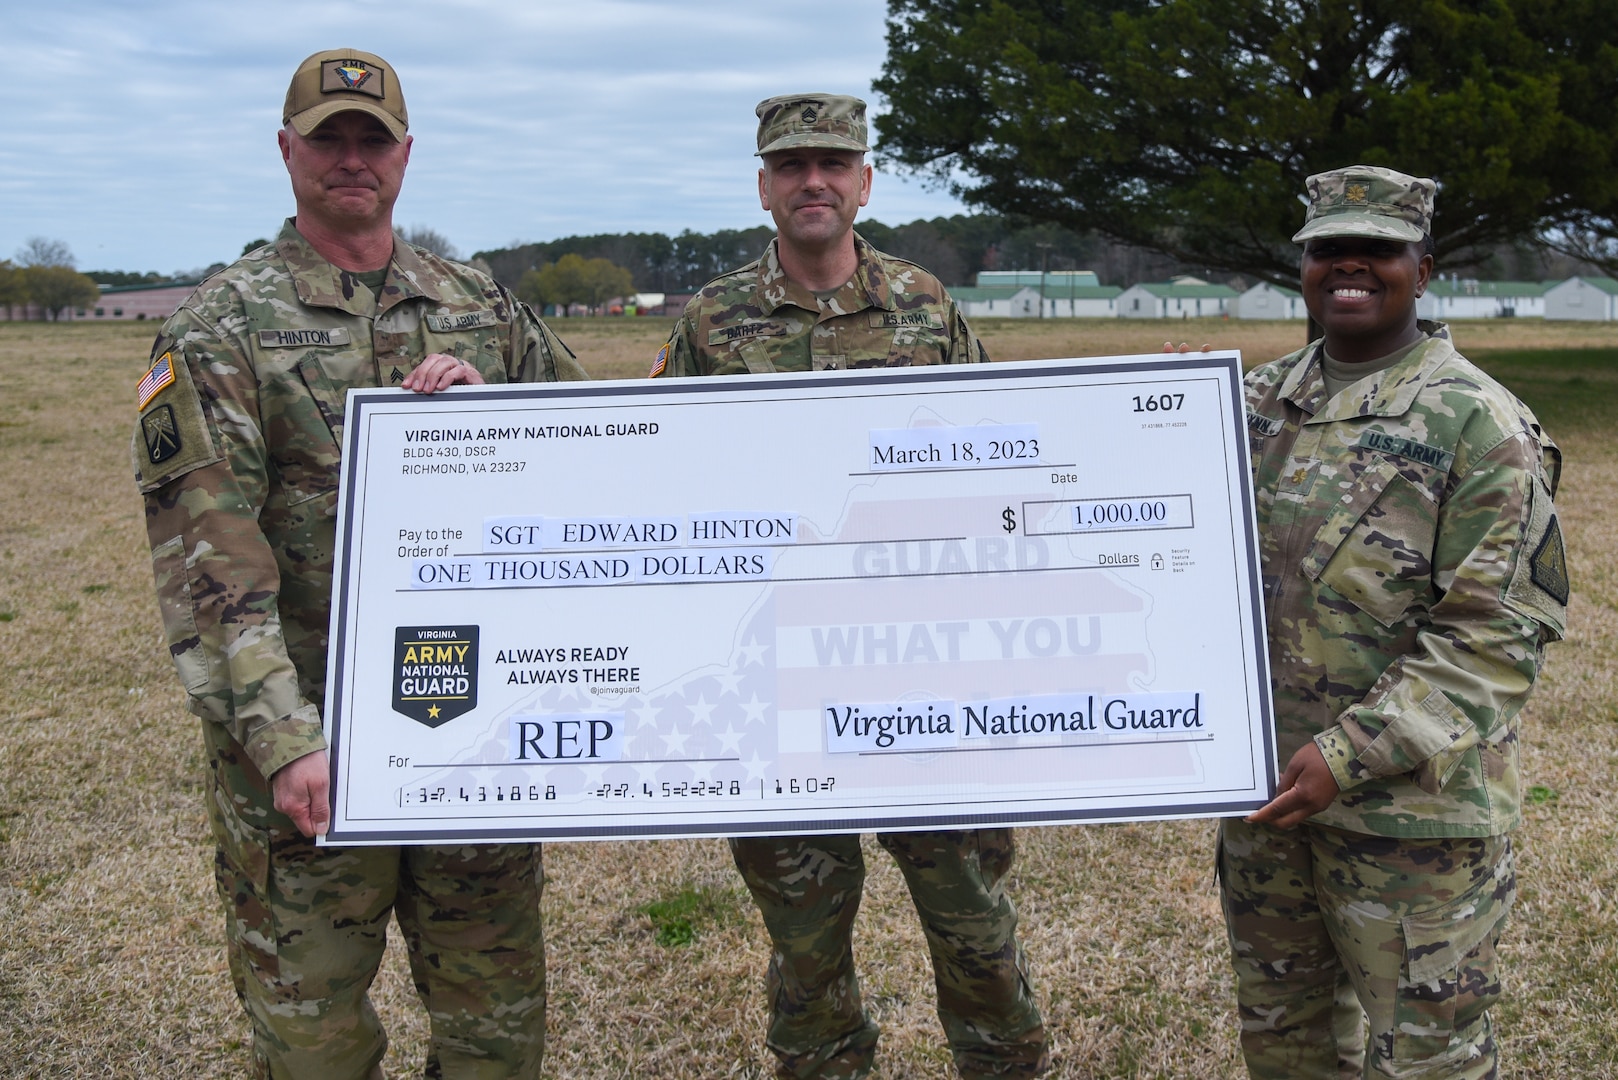 Sgt. Edward Hinton receives a ceremonial check for $1,000 as part of his participation in the Virginia National Guard’s Referral Enlistment Program March 18, 2023, at the State Military Reservation in Virginia Beach, Virginia. Lt. Col. Emily Huffman, SMR commander, and Maj. Kim Wynn, commander of the Virginia National Guard’s Recruiting and Retention Battalion, were on hand to congratulate and thank Hinton for helping grow the force. Hinton, assigned to SMR as an operations noncommissioned officer, worked with area recruiter Staff Sgt. Shawn Bartz to enlist a new recruit into the Virginia Army National Guard as a 09S Commissioned Officer Candidate. Hinton is the first participant to receive payment under the REP, which awards Virginia citizens $1,000 for providing qualified leads to the Virginia National Guard who enlist into the organization. (U.S. Army National Guard photo by Sgt. 1st Class Terra C. Gatti)